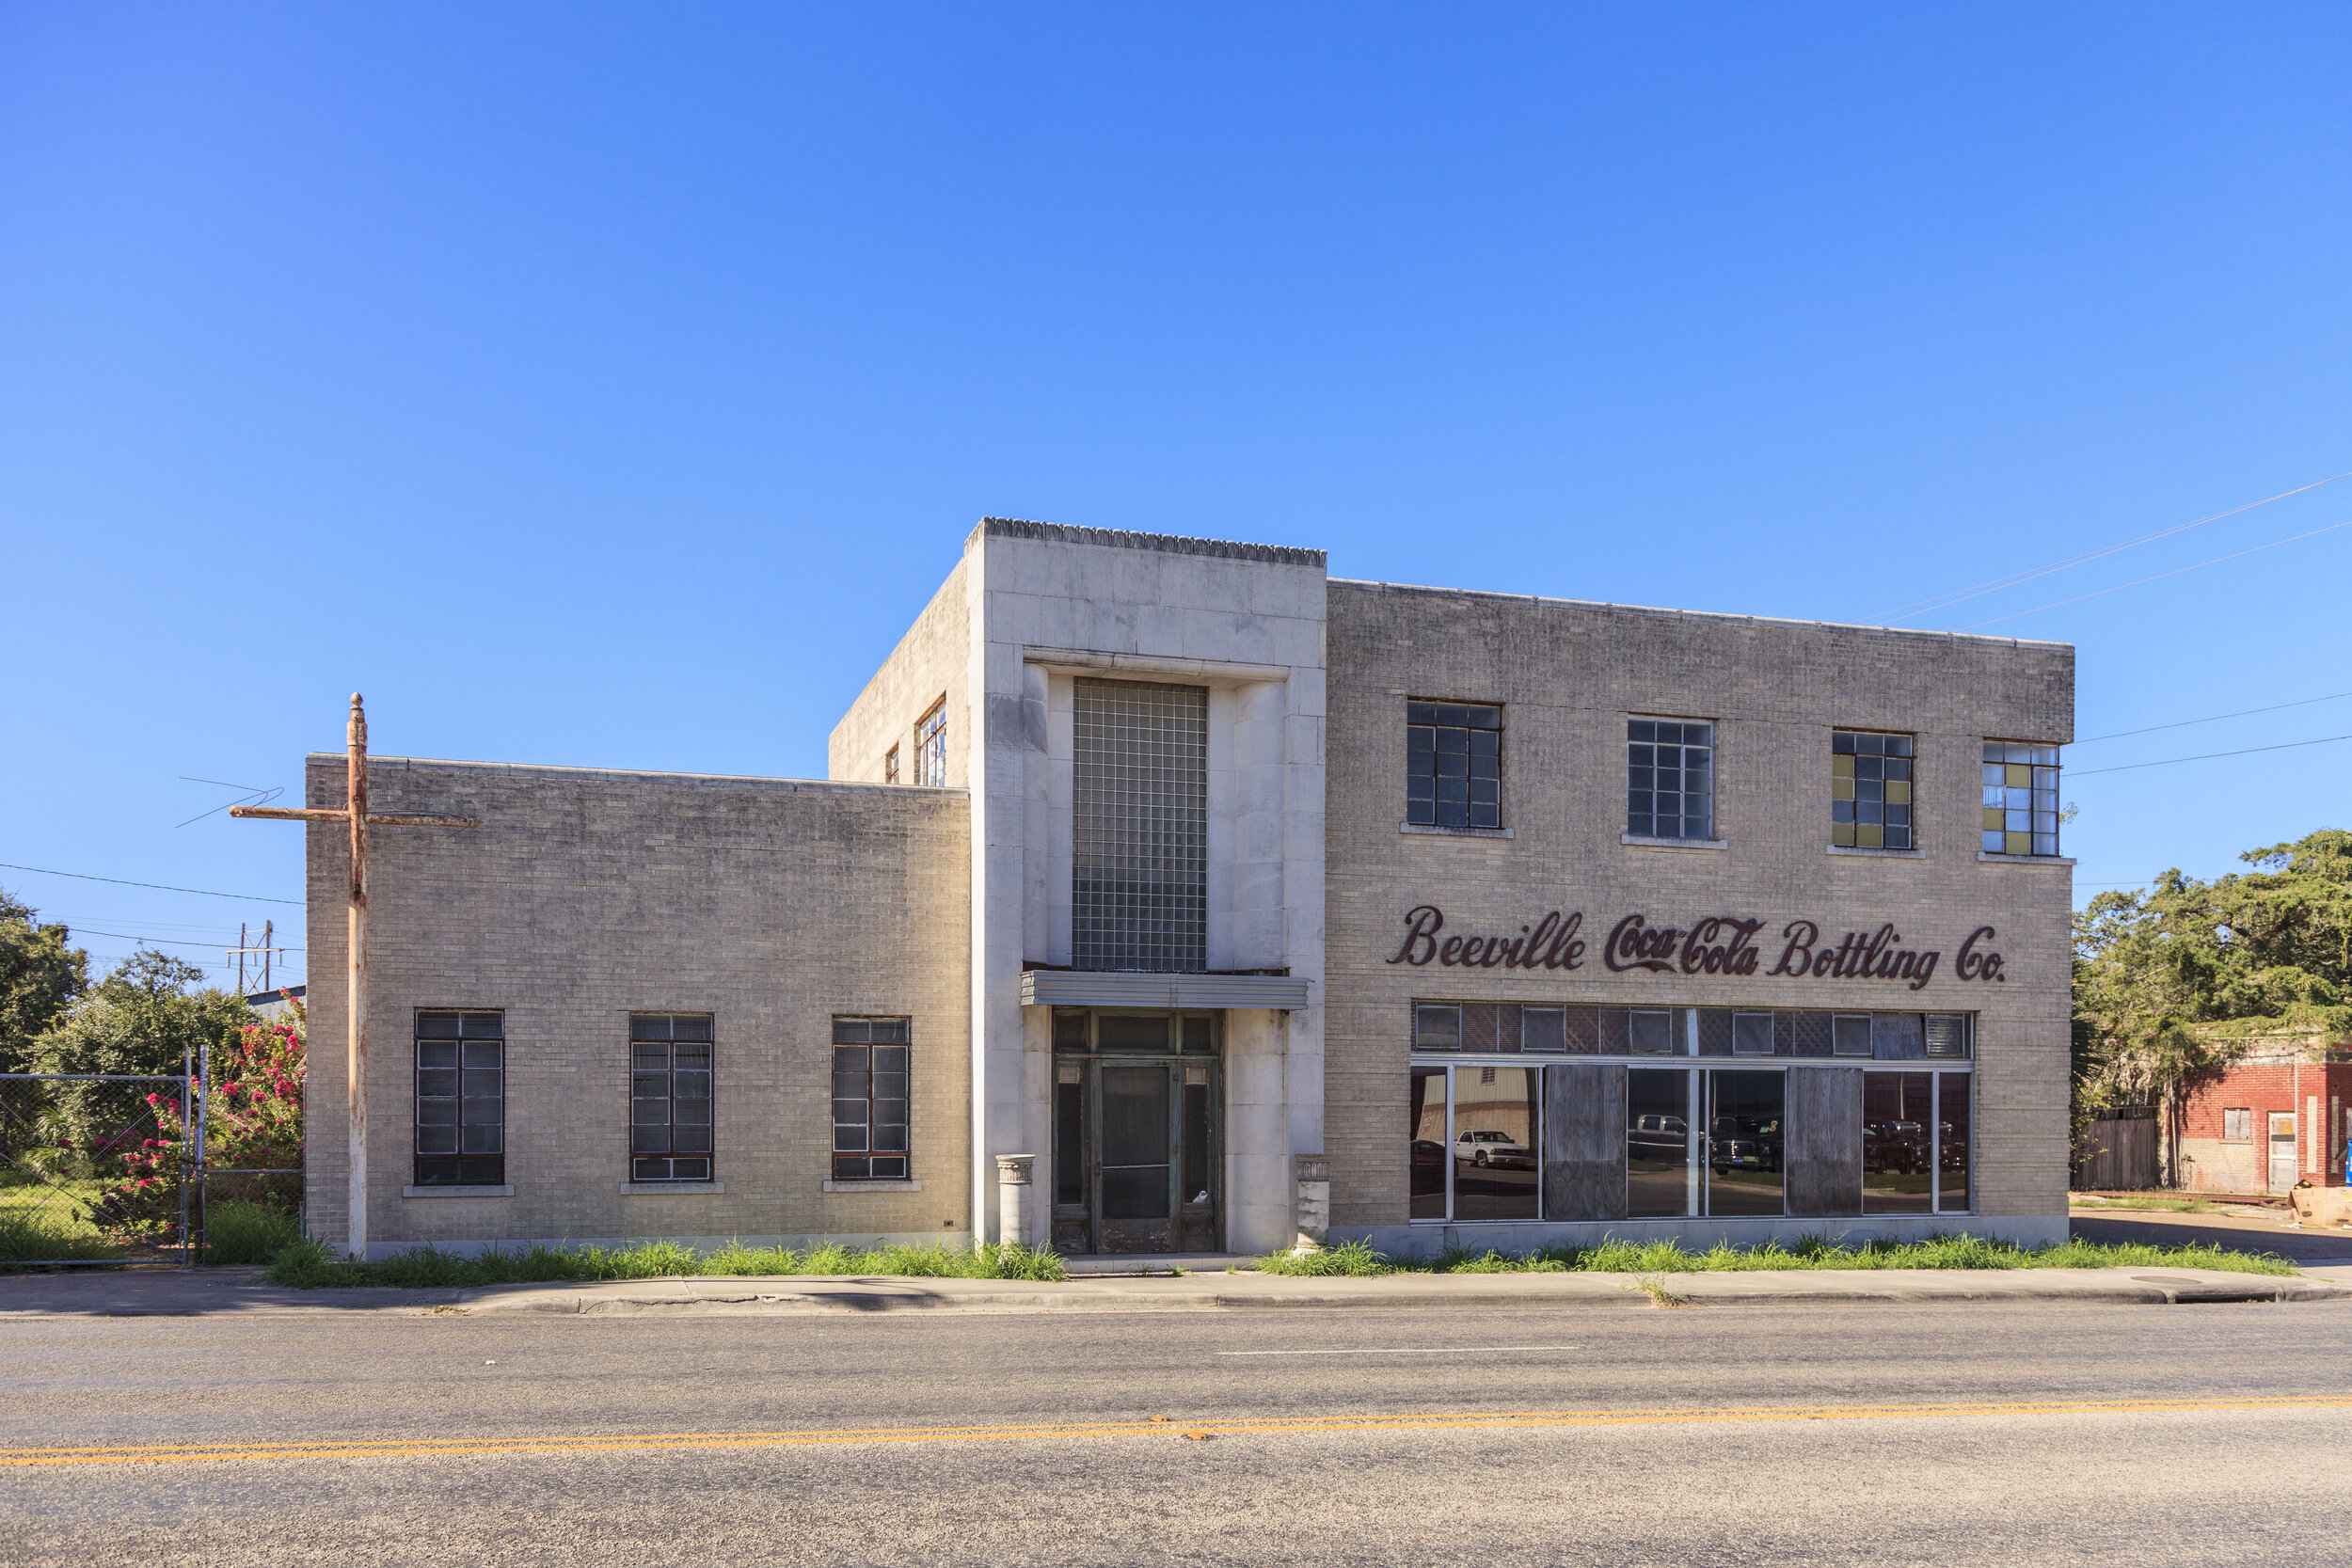 Coc- Cola bottling plant in Beeville. Photo by Bronson Dorsey